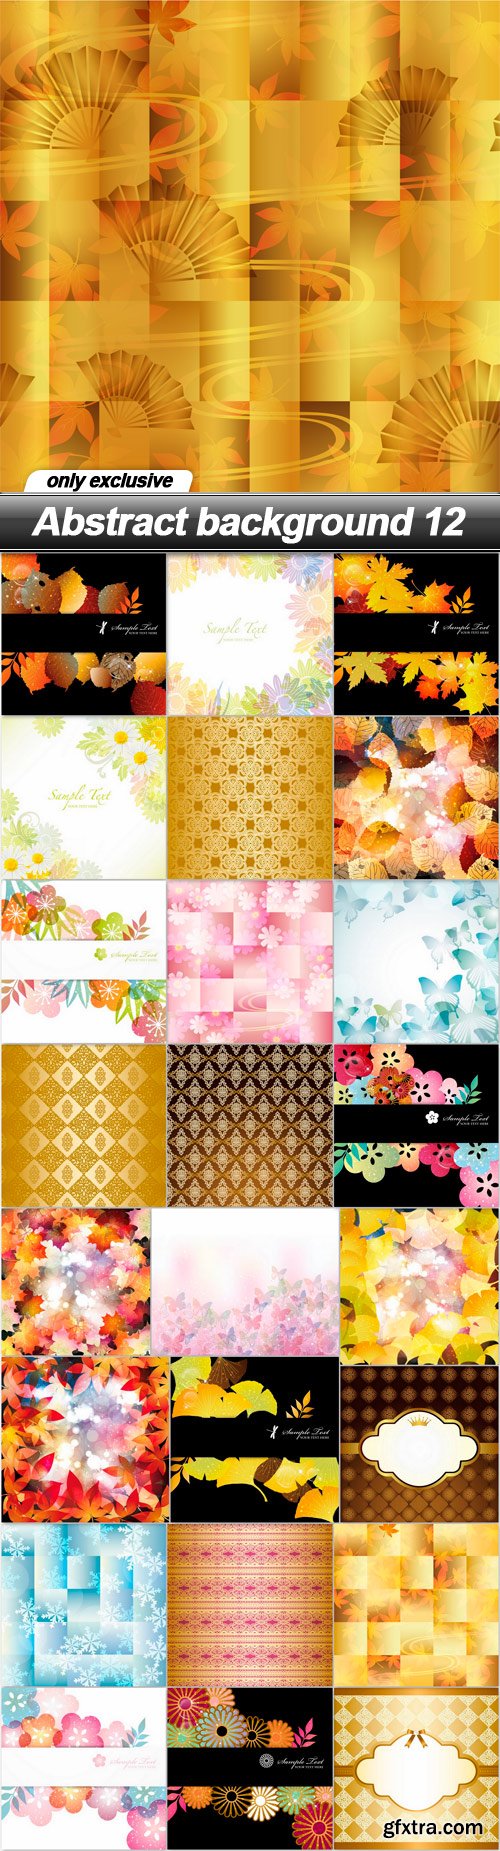 Abstract background 12 - 25 EPS